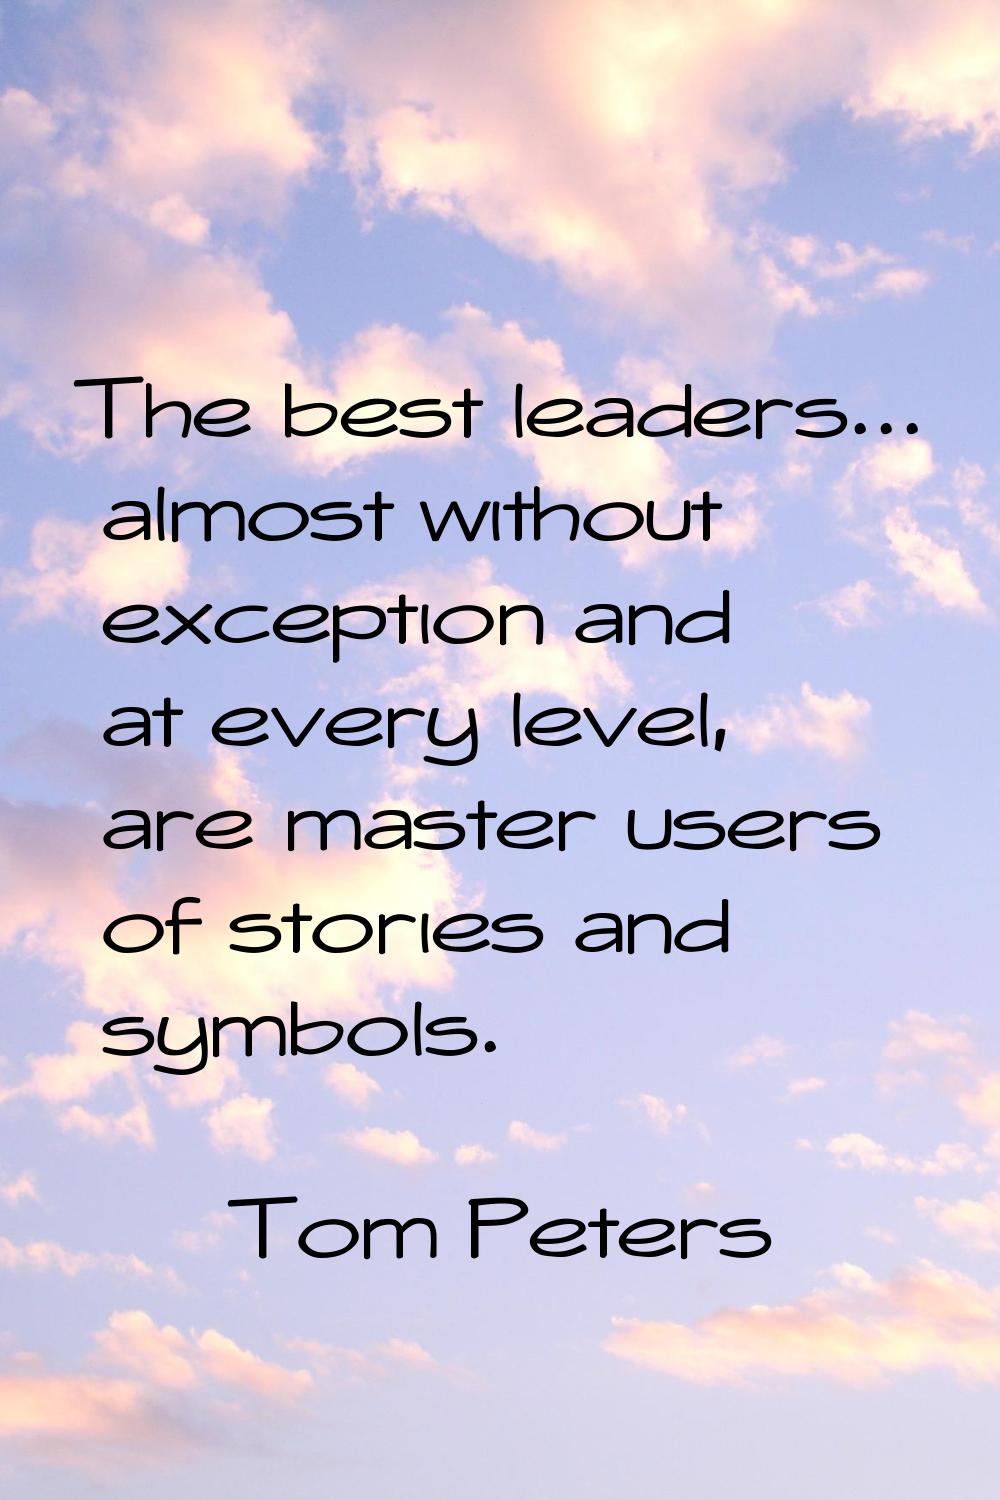 The best leaders... almost without exception and at every level, are master users of stories and sy